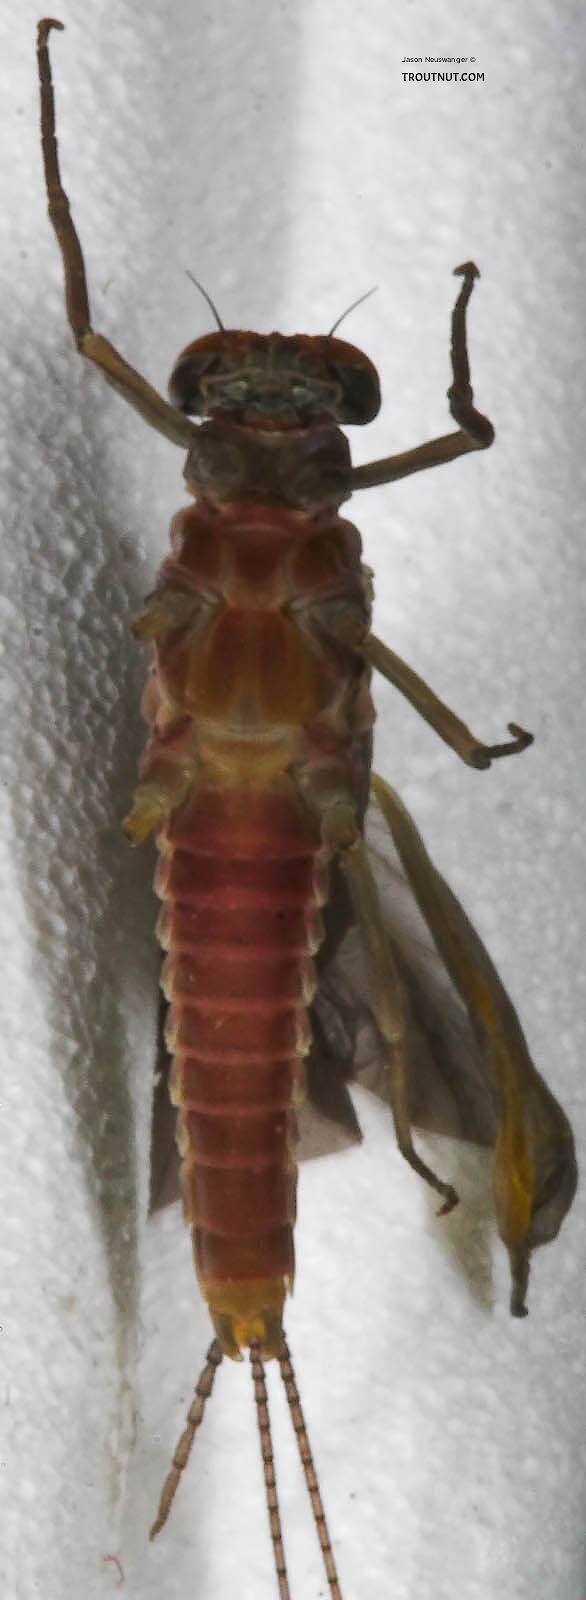 Ventral view of a Male Ephemerella subvaria (Ephemerellidae) (Hendrickson) Mayfly Dun from the West Branch of the Delaware River in New York